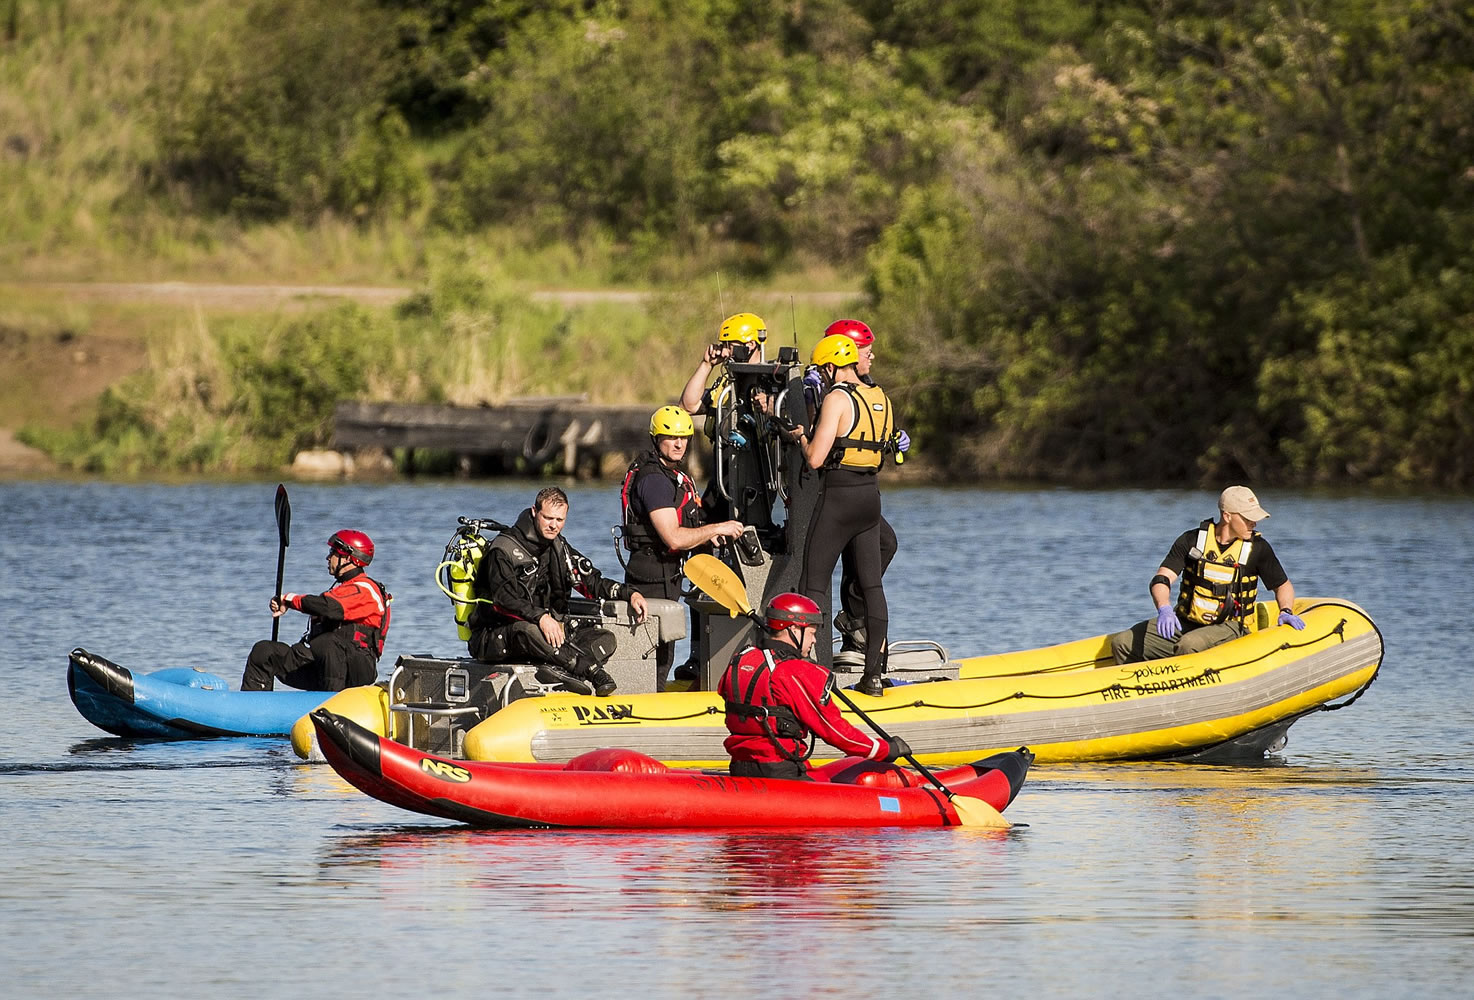 The Spokane County Sheriff's dive team and other emergency personnel search the Spokane River on Thursday near where a small plane crashed.